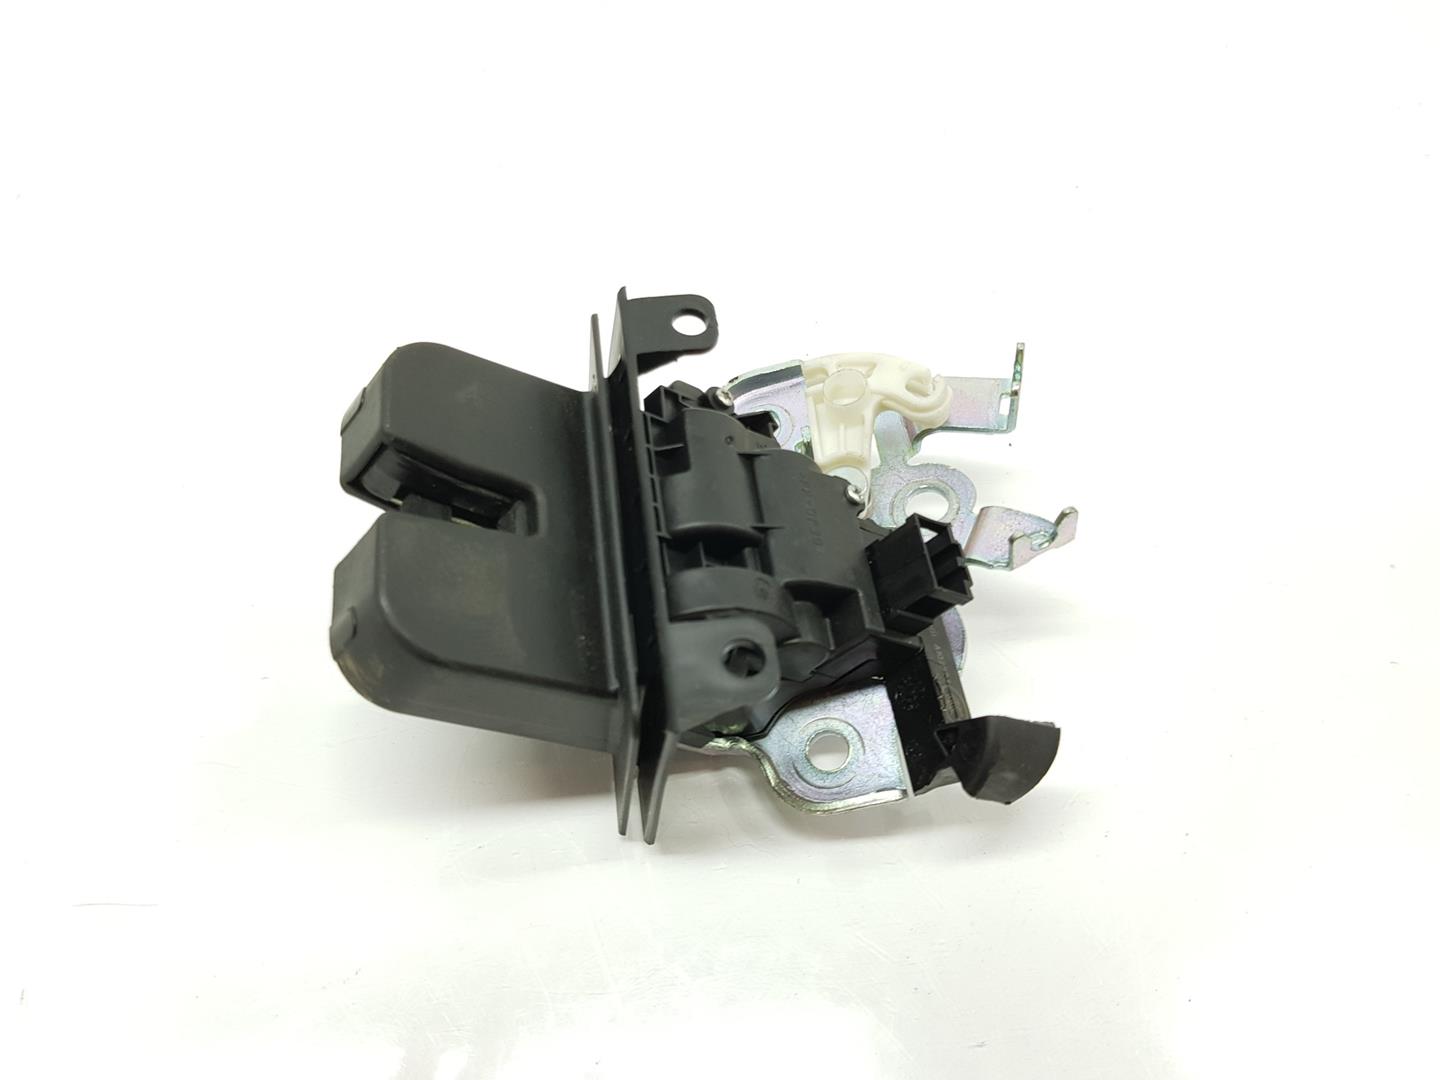 SEAT Toledo 4 generation (2012-2020) Tailgate Boot Lock 8R0827505A, 8R0827505A 24249774